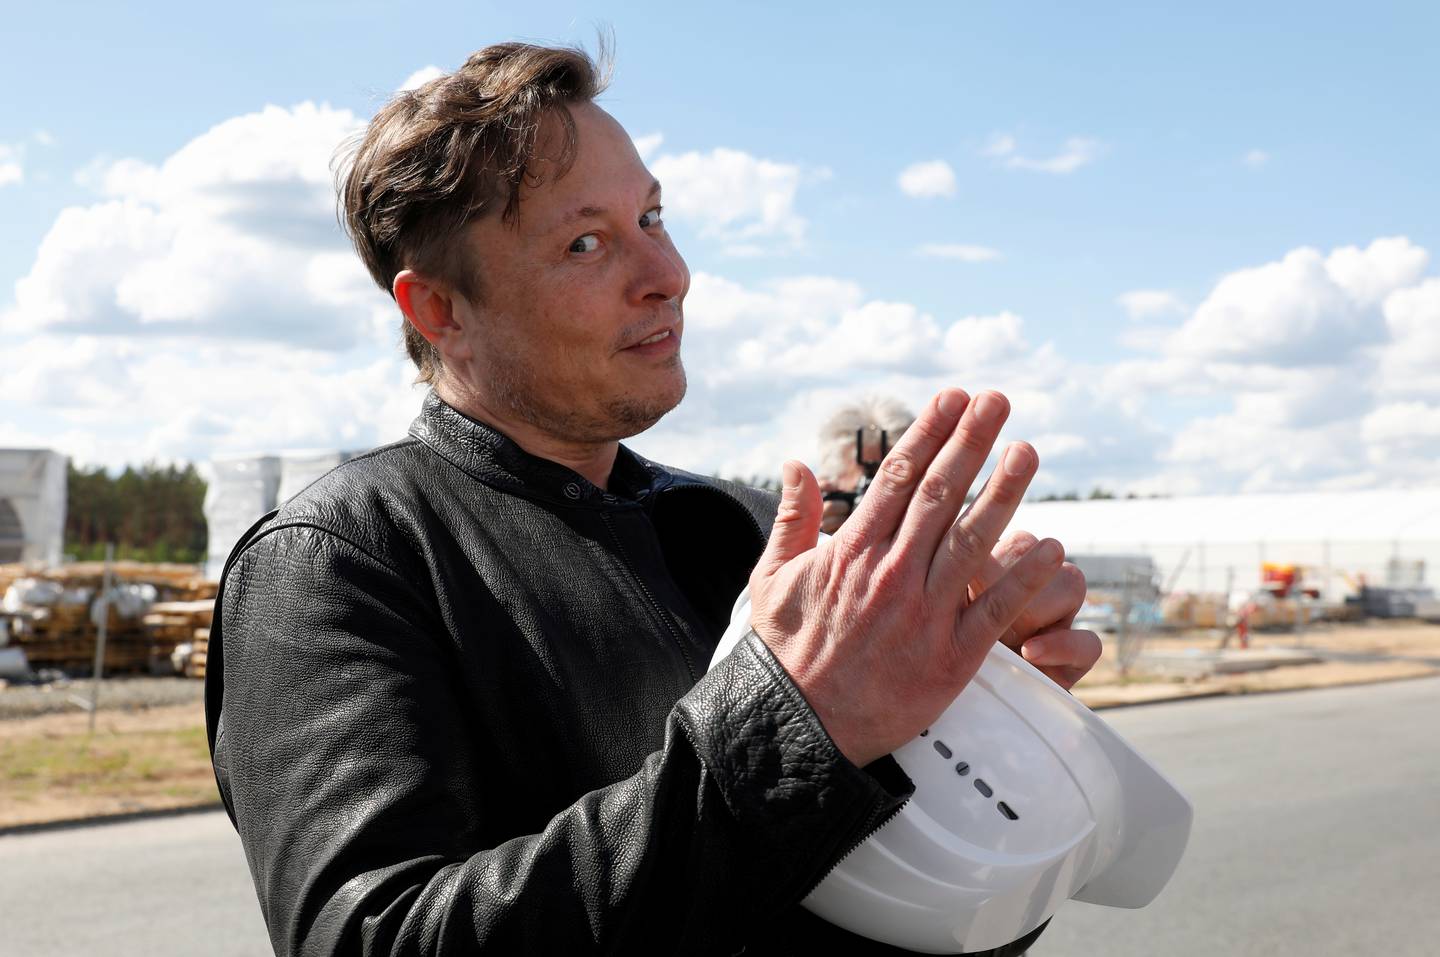 SpaceX founder and Tesla chief executive Elon Musk's net worth of $288.6 billion is now greater than the market value of Exxon Mobil or Nike. Reuters